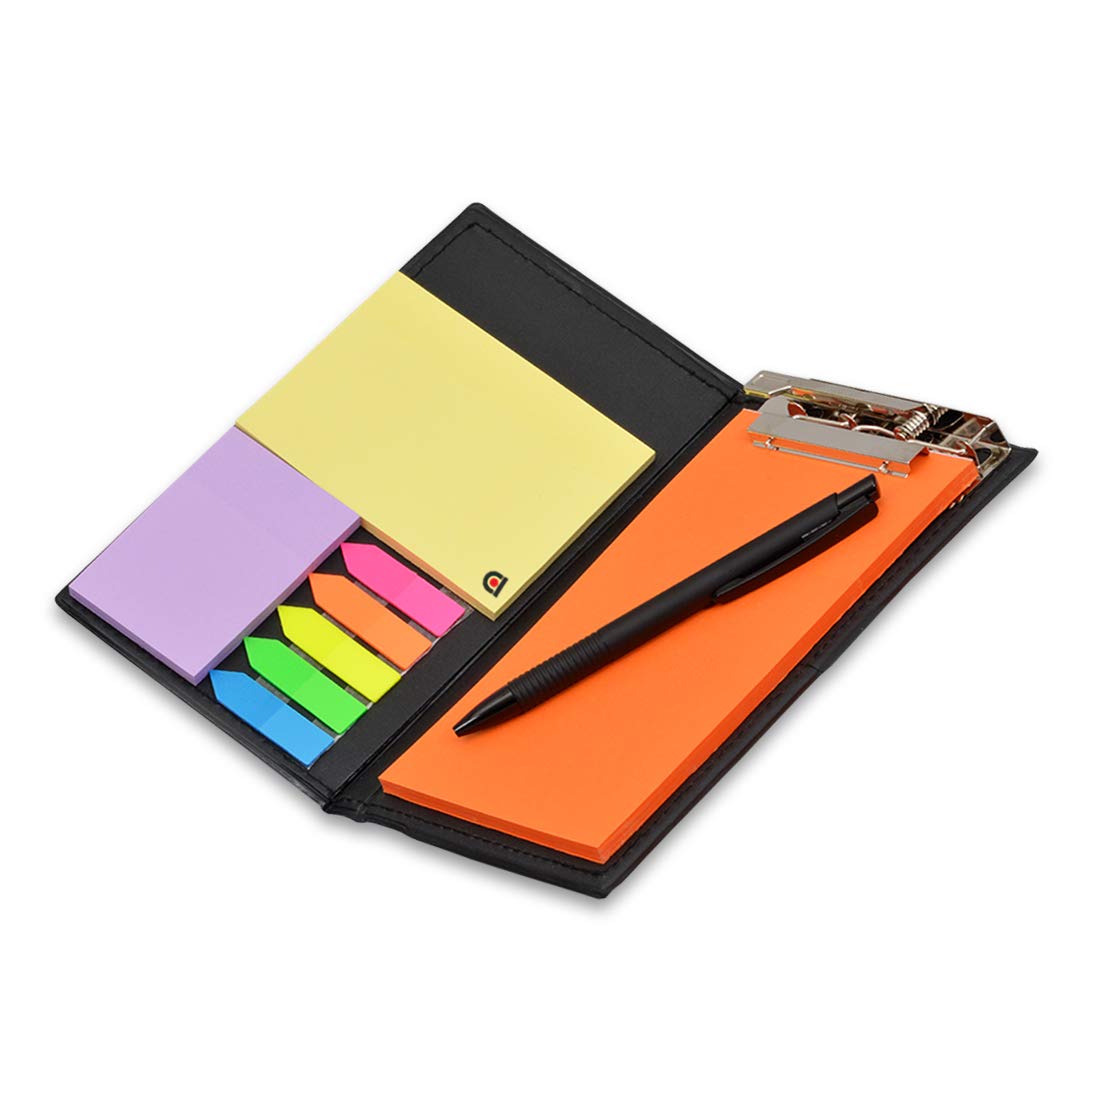 Buy Desk Organizer, Notepad Memo Holder with Colorful Sticky Notes Online